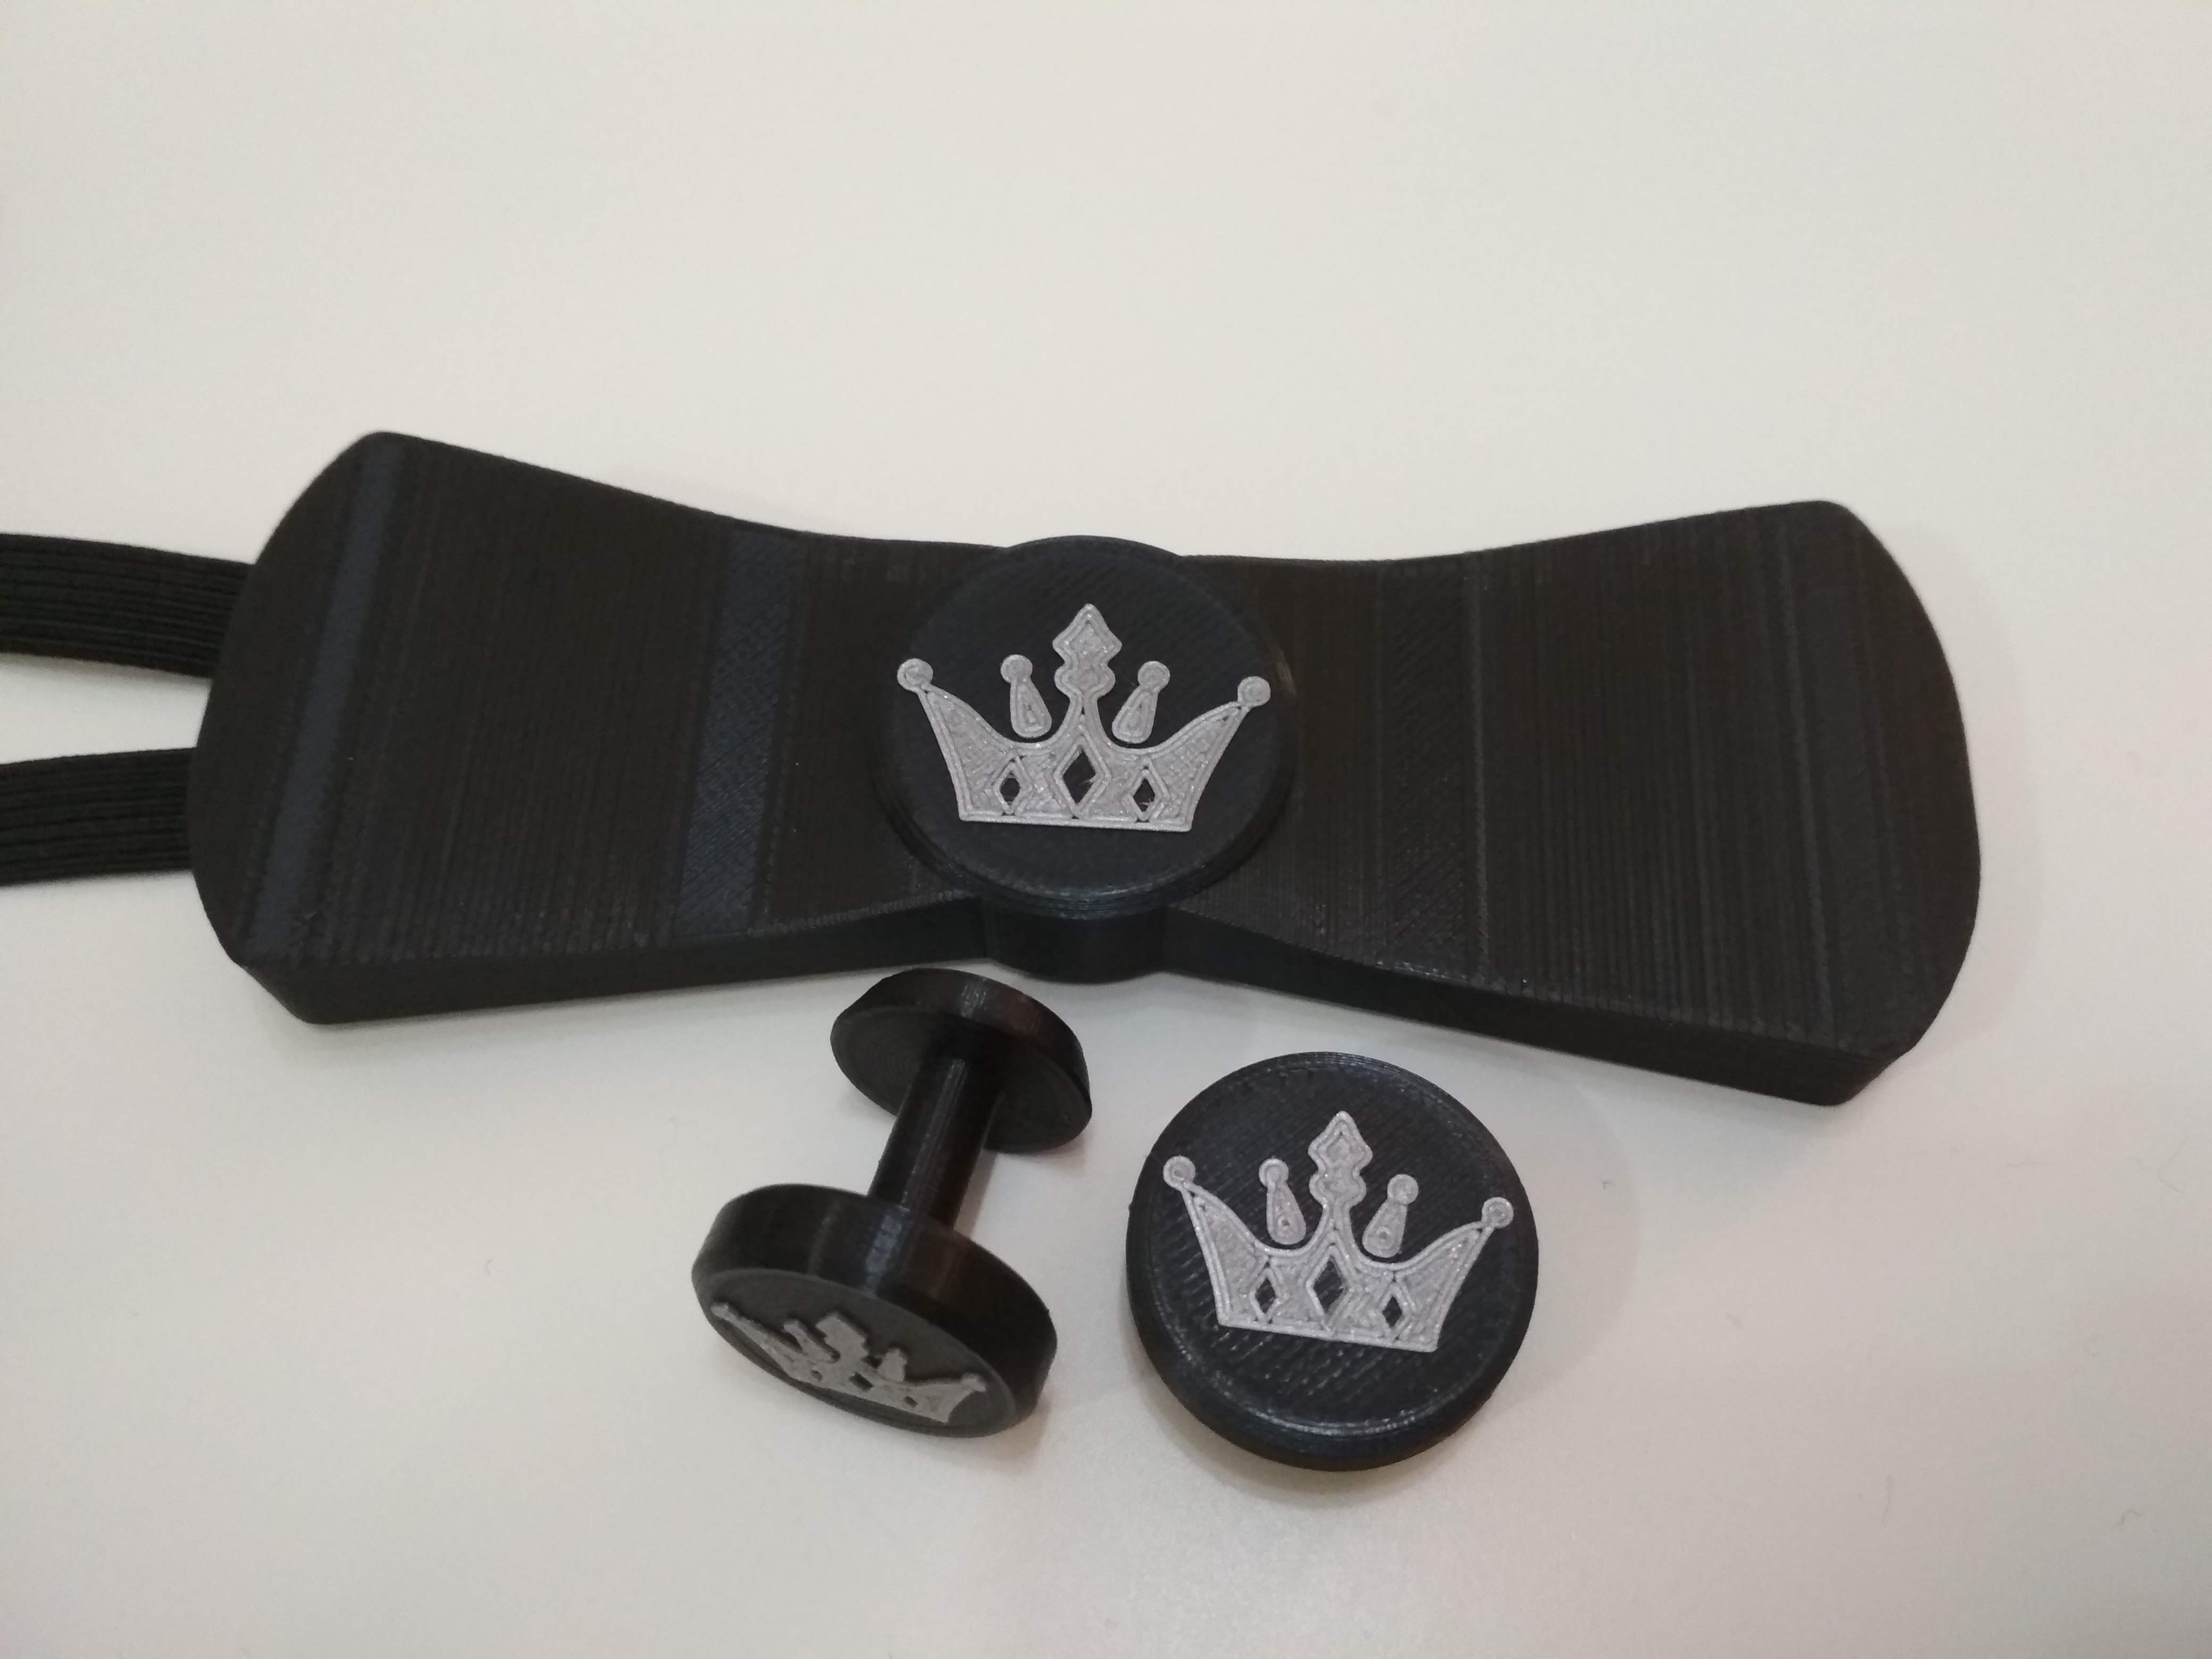 Royal Crown Set - Bow tie, cufflinks and lapel decoration